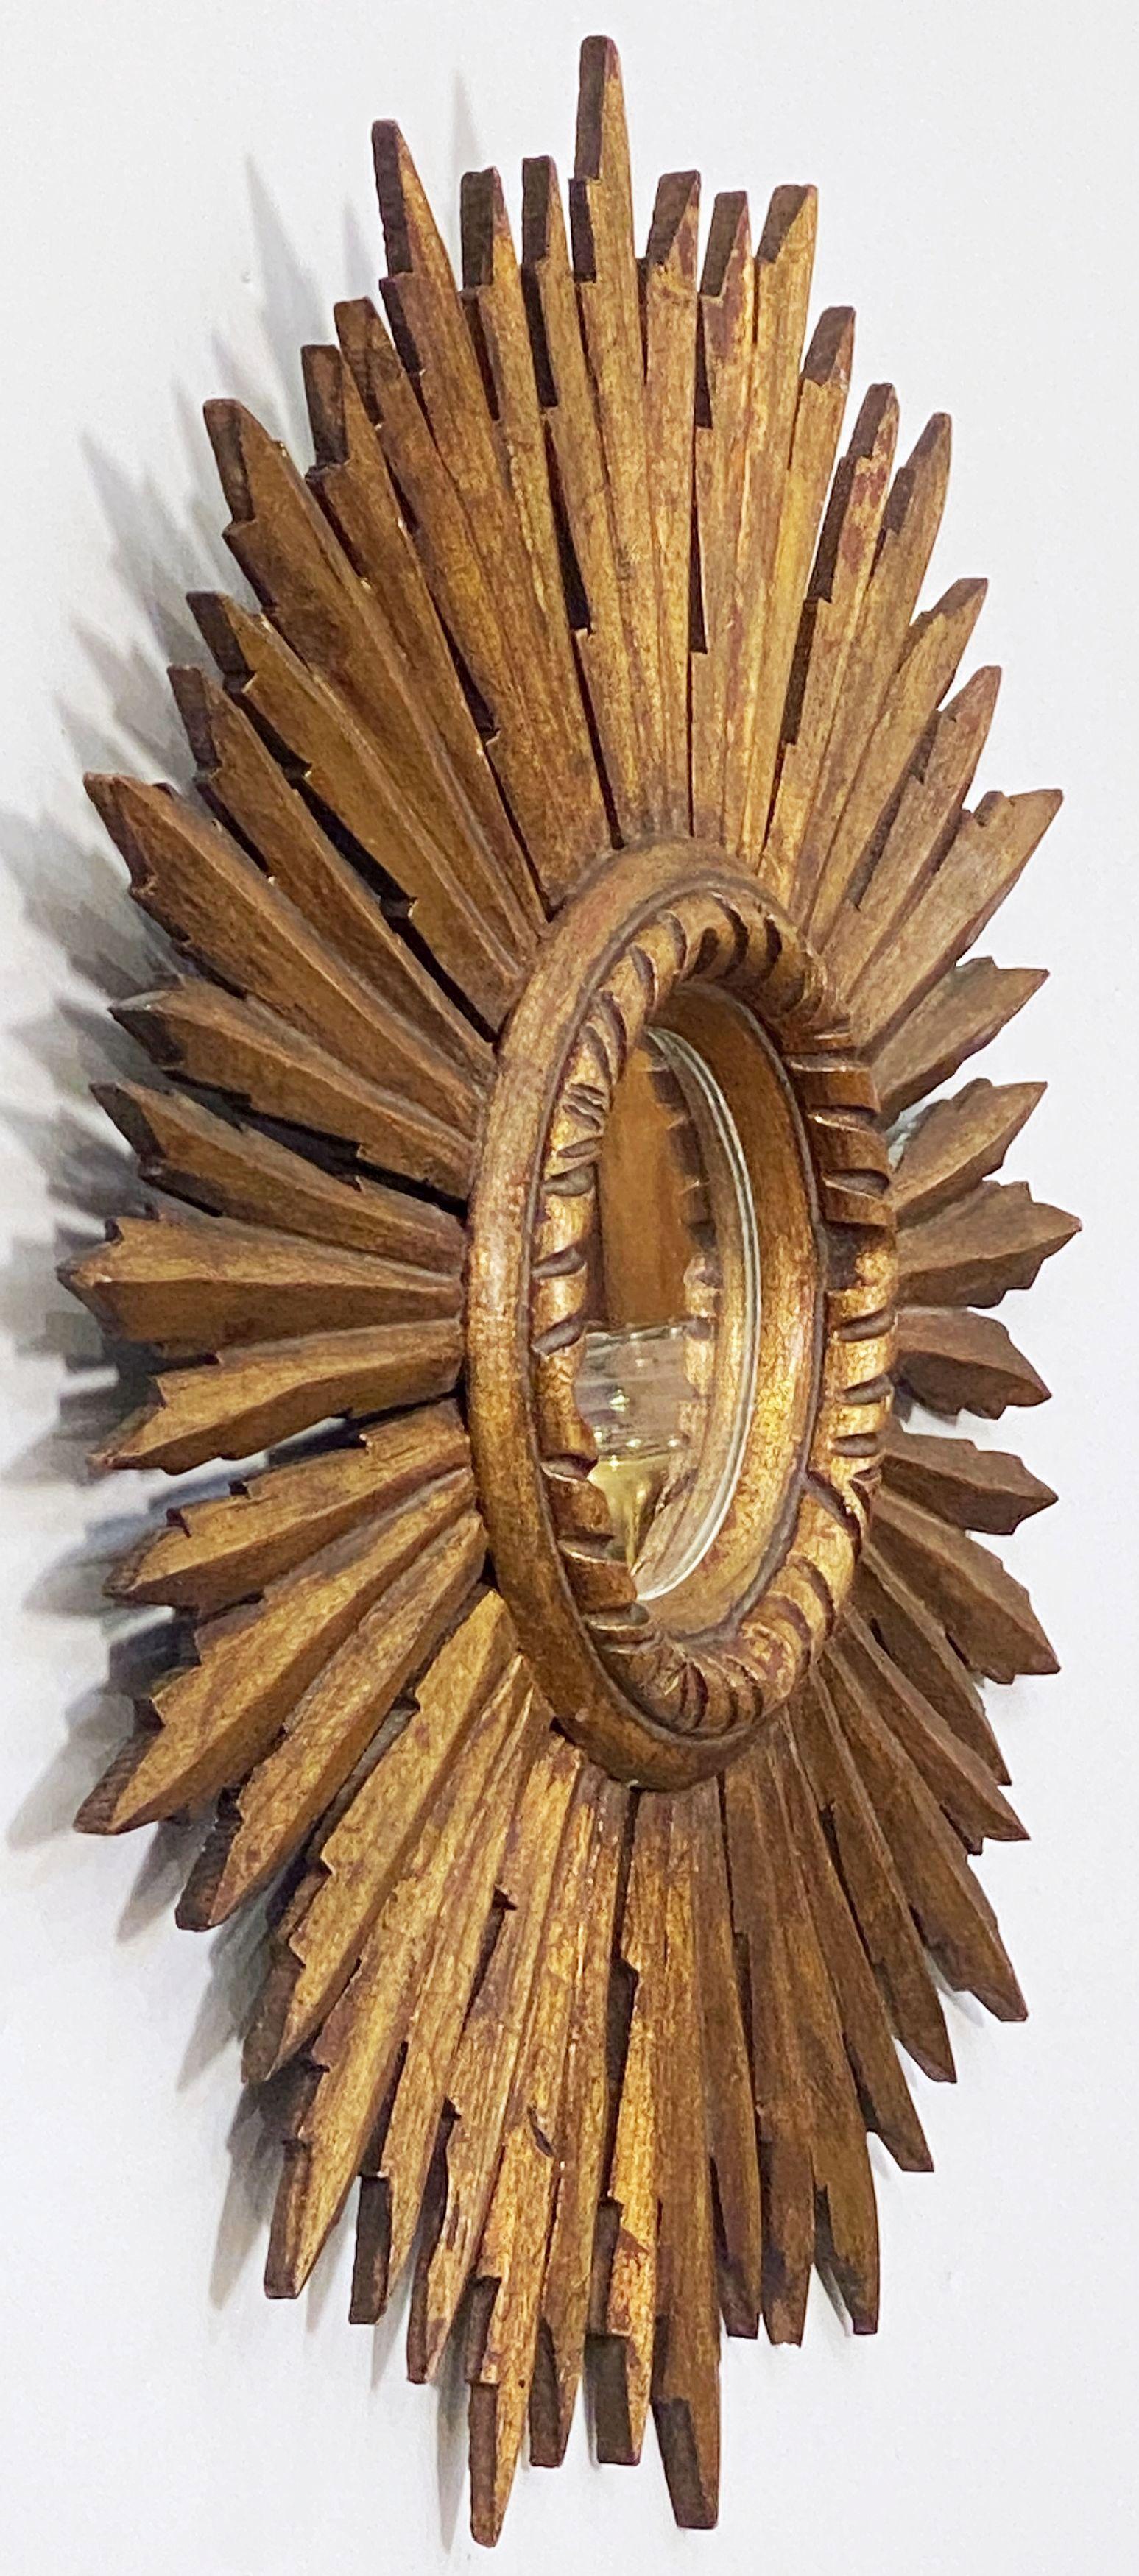 A lovely Spanish gilt sunburst or starburst mirror with circular mirrored glass center in carved frame.

Measure: Diameter of 18 inches